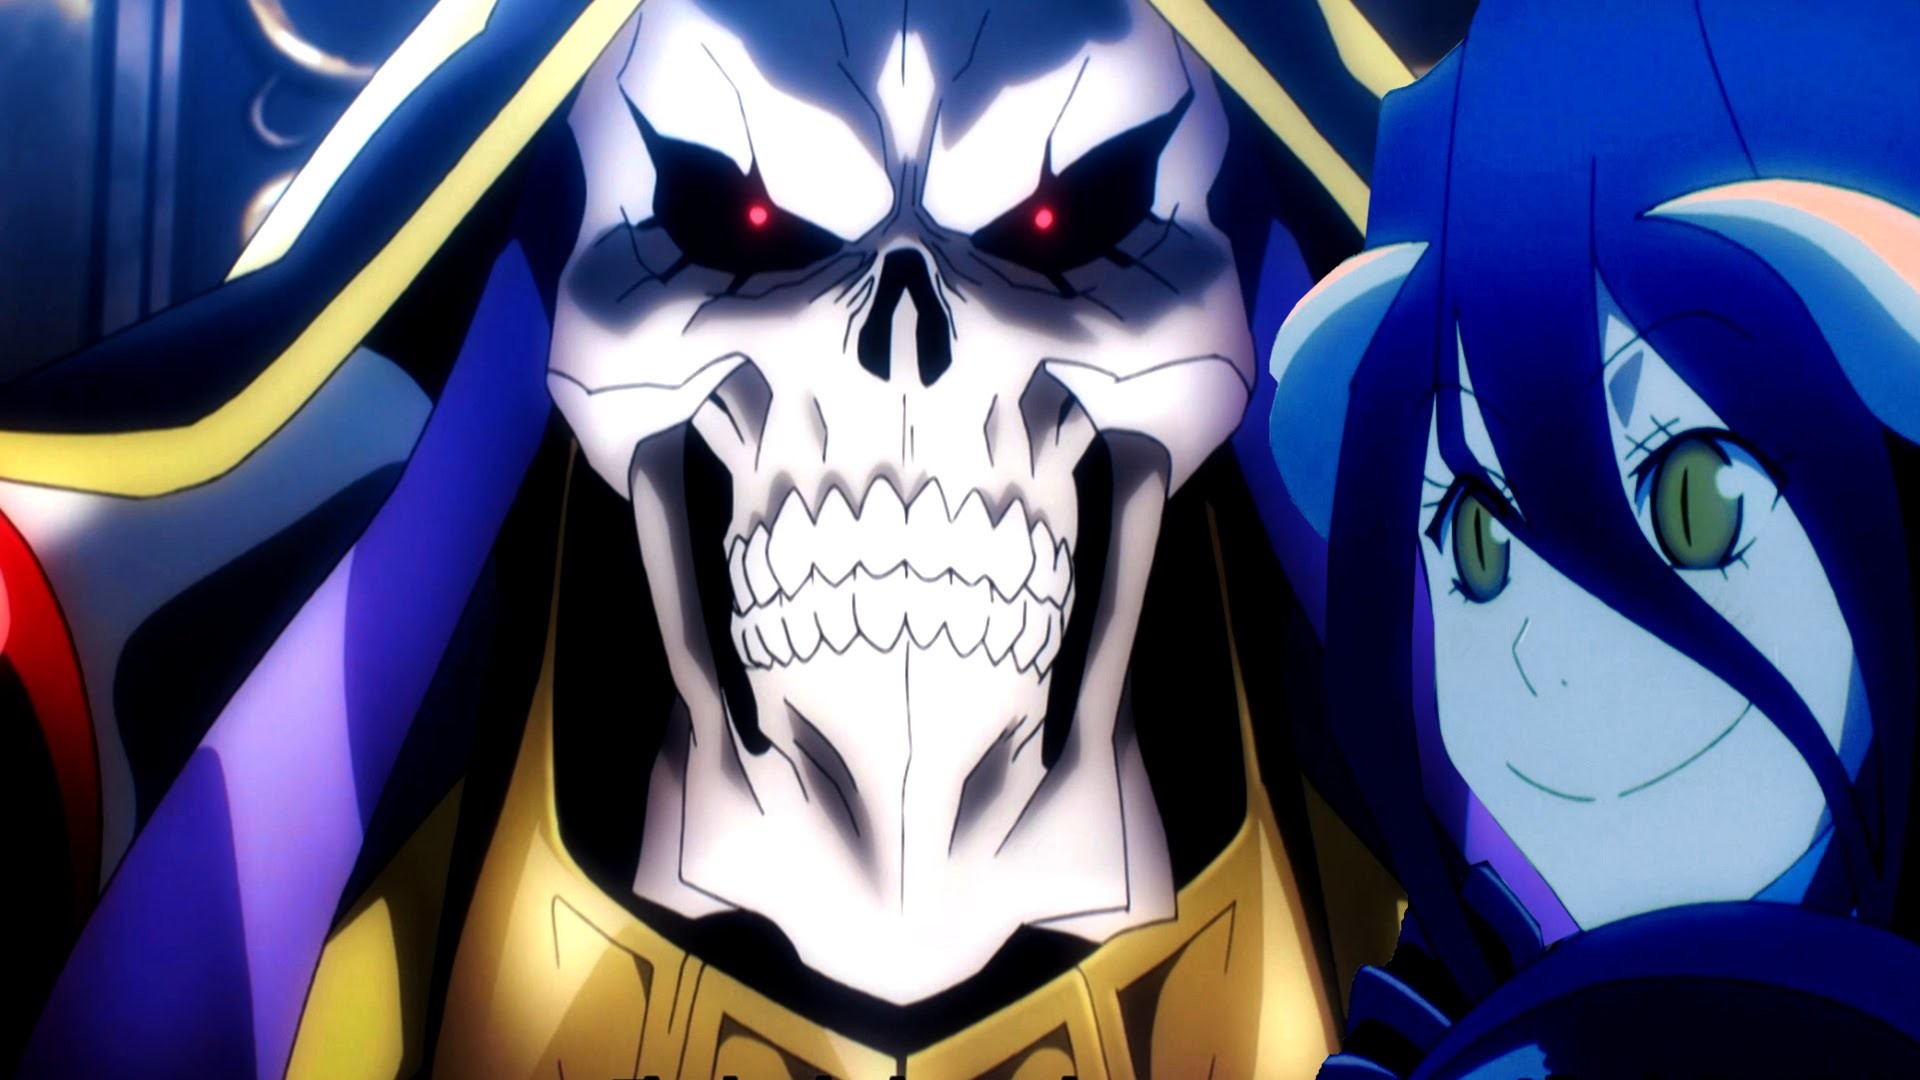 Overlord Episode 4 Anime Review – Ainz The Overlord – YouTube